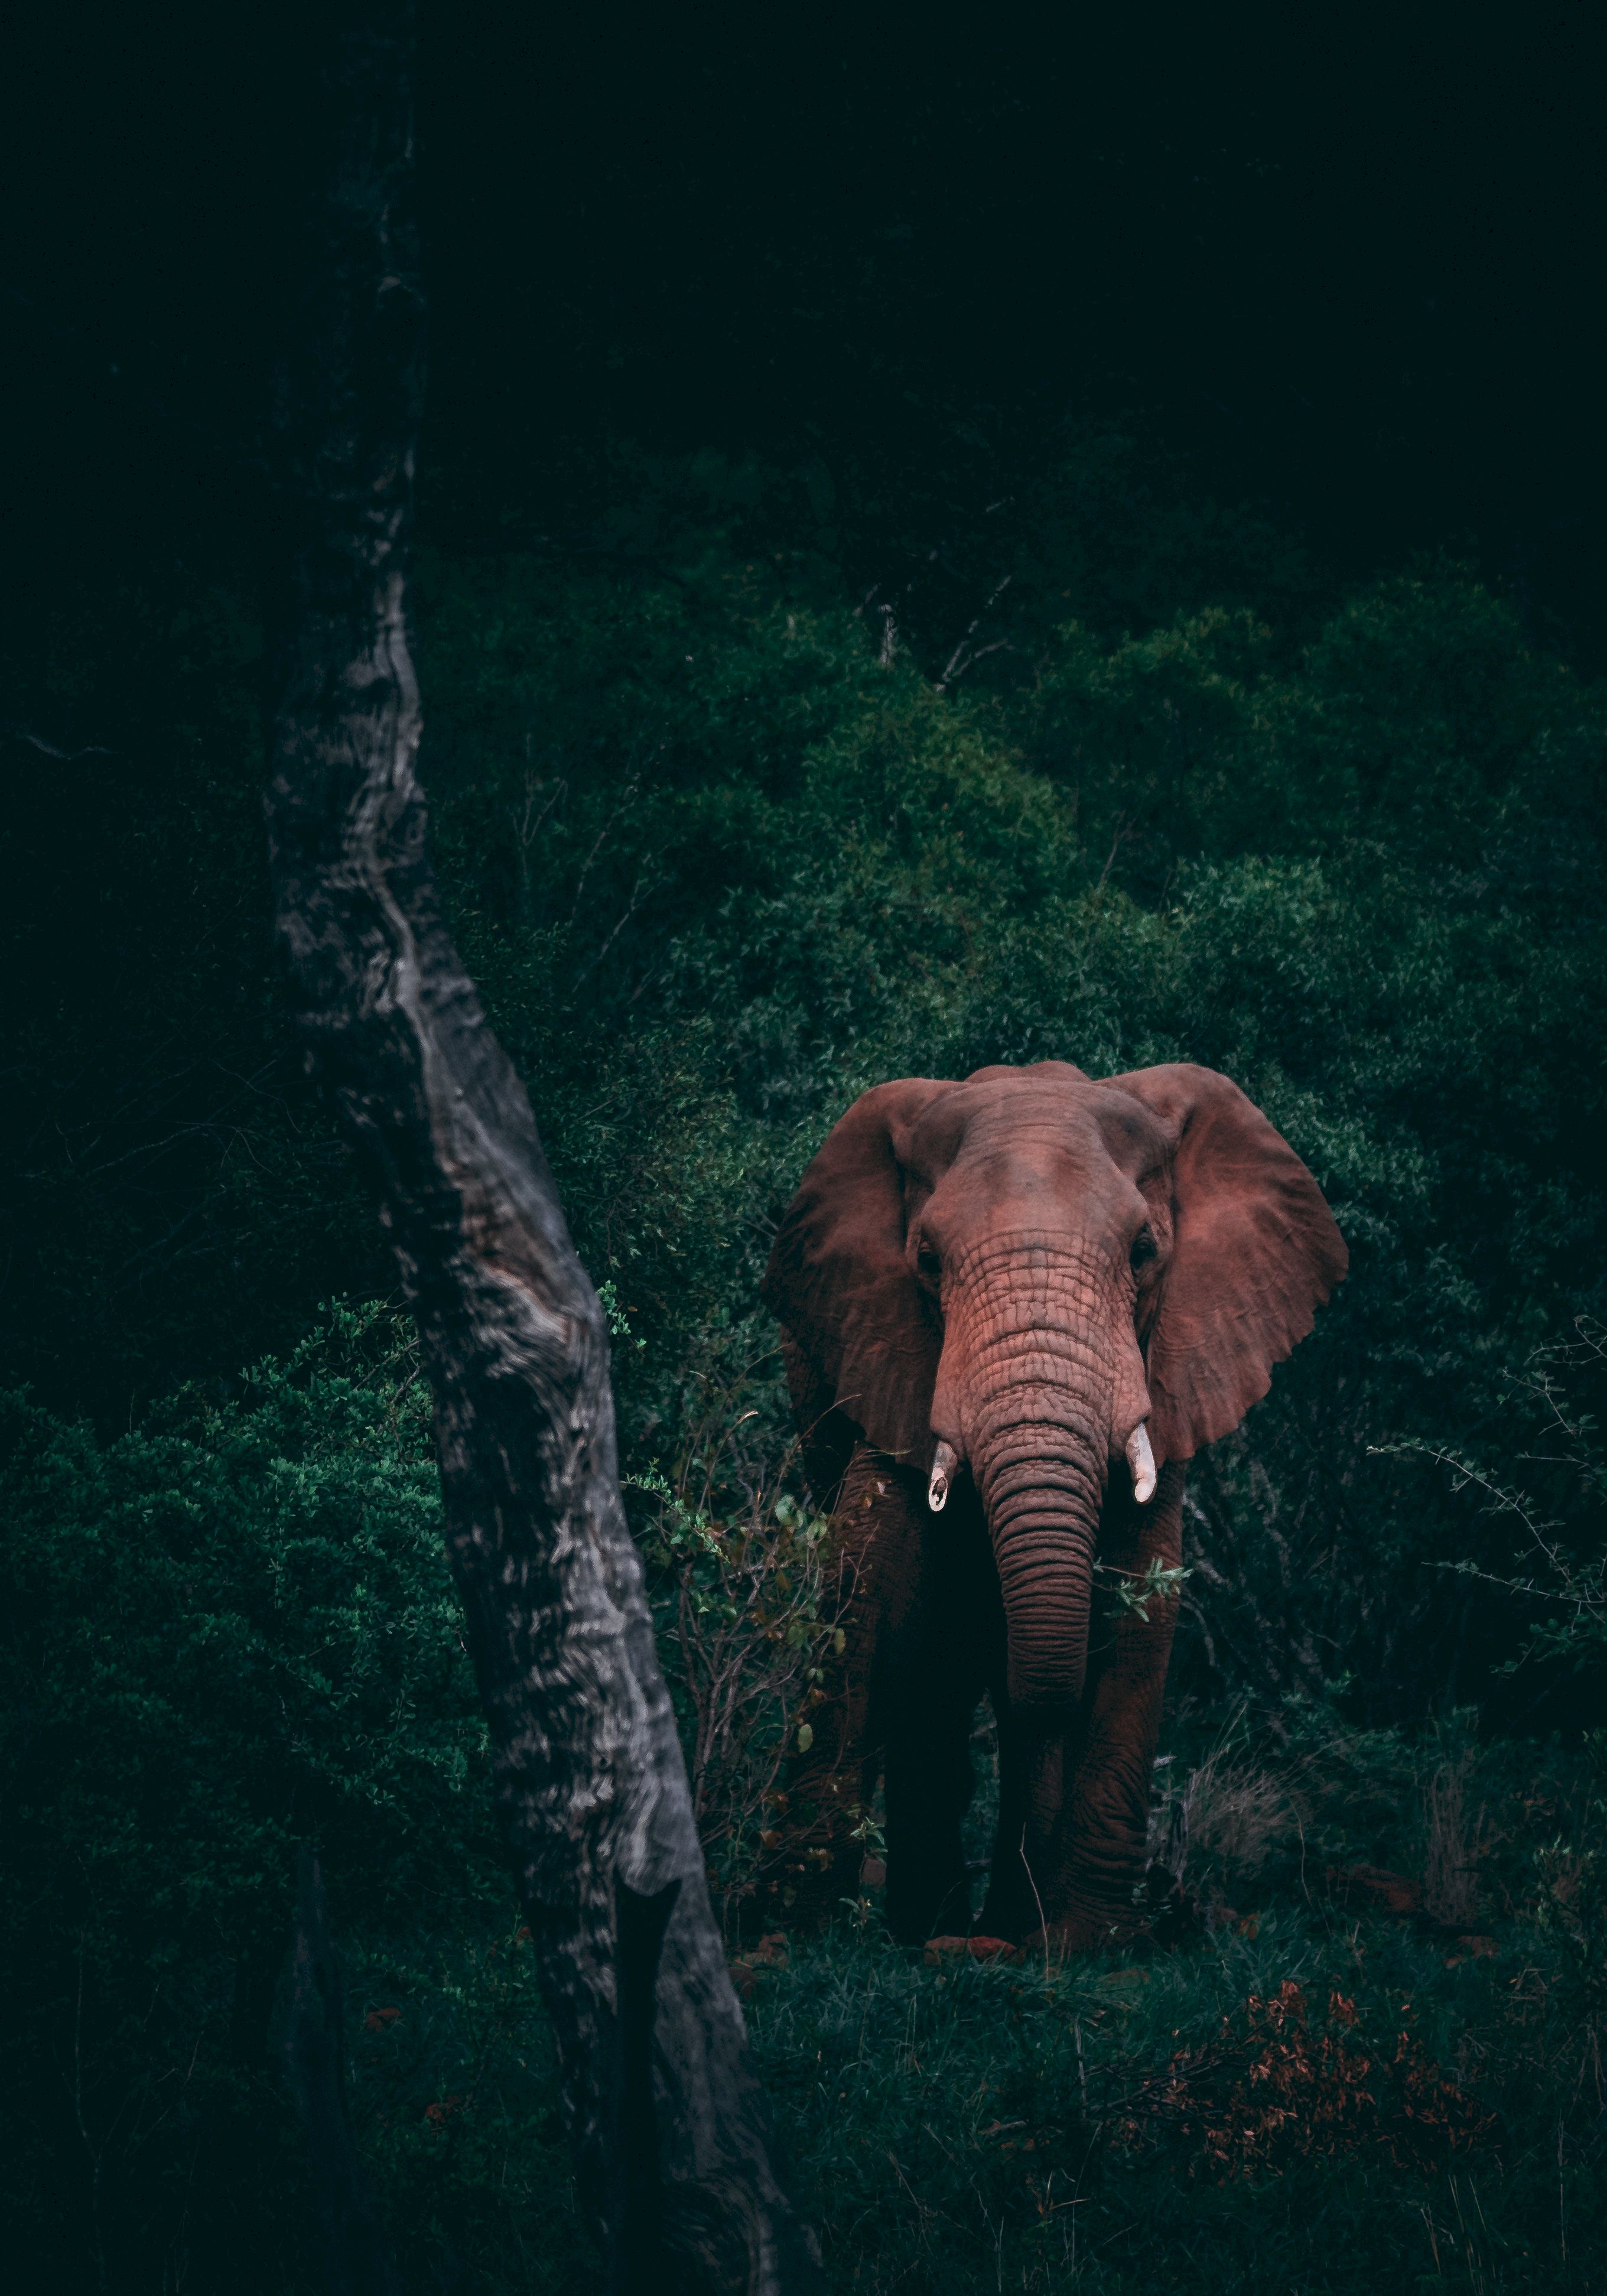 70547 free wallpaper 360x640 for phone, download images elephant, forest, wildlife, dark 360x640 for mobile